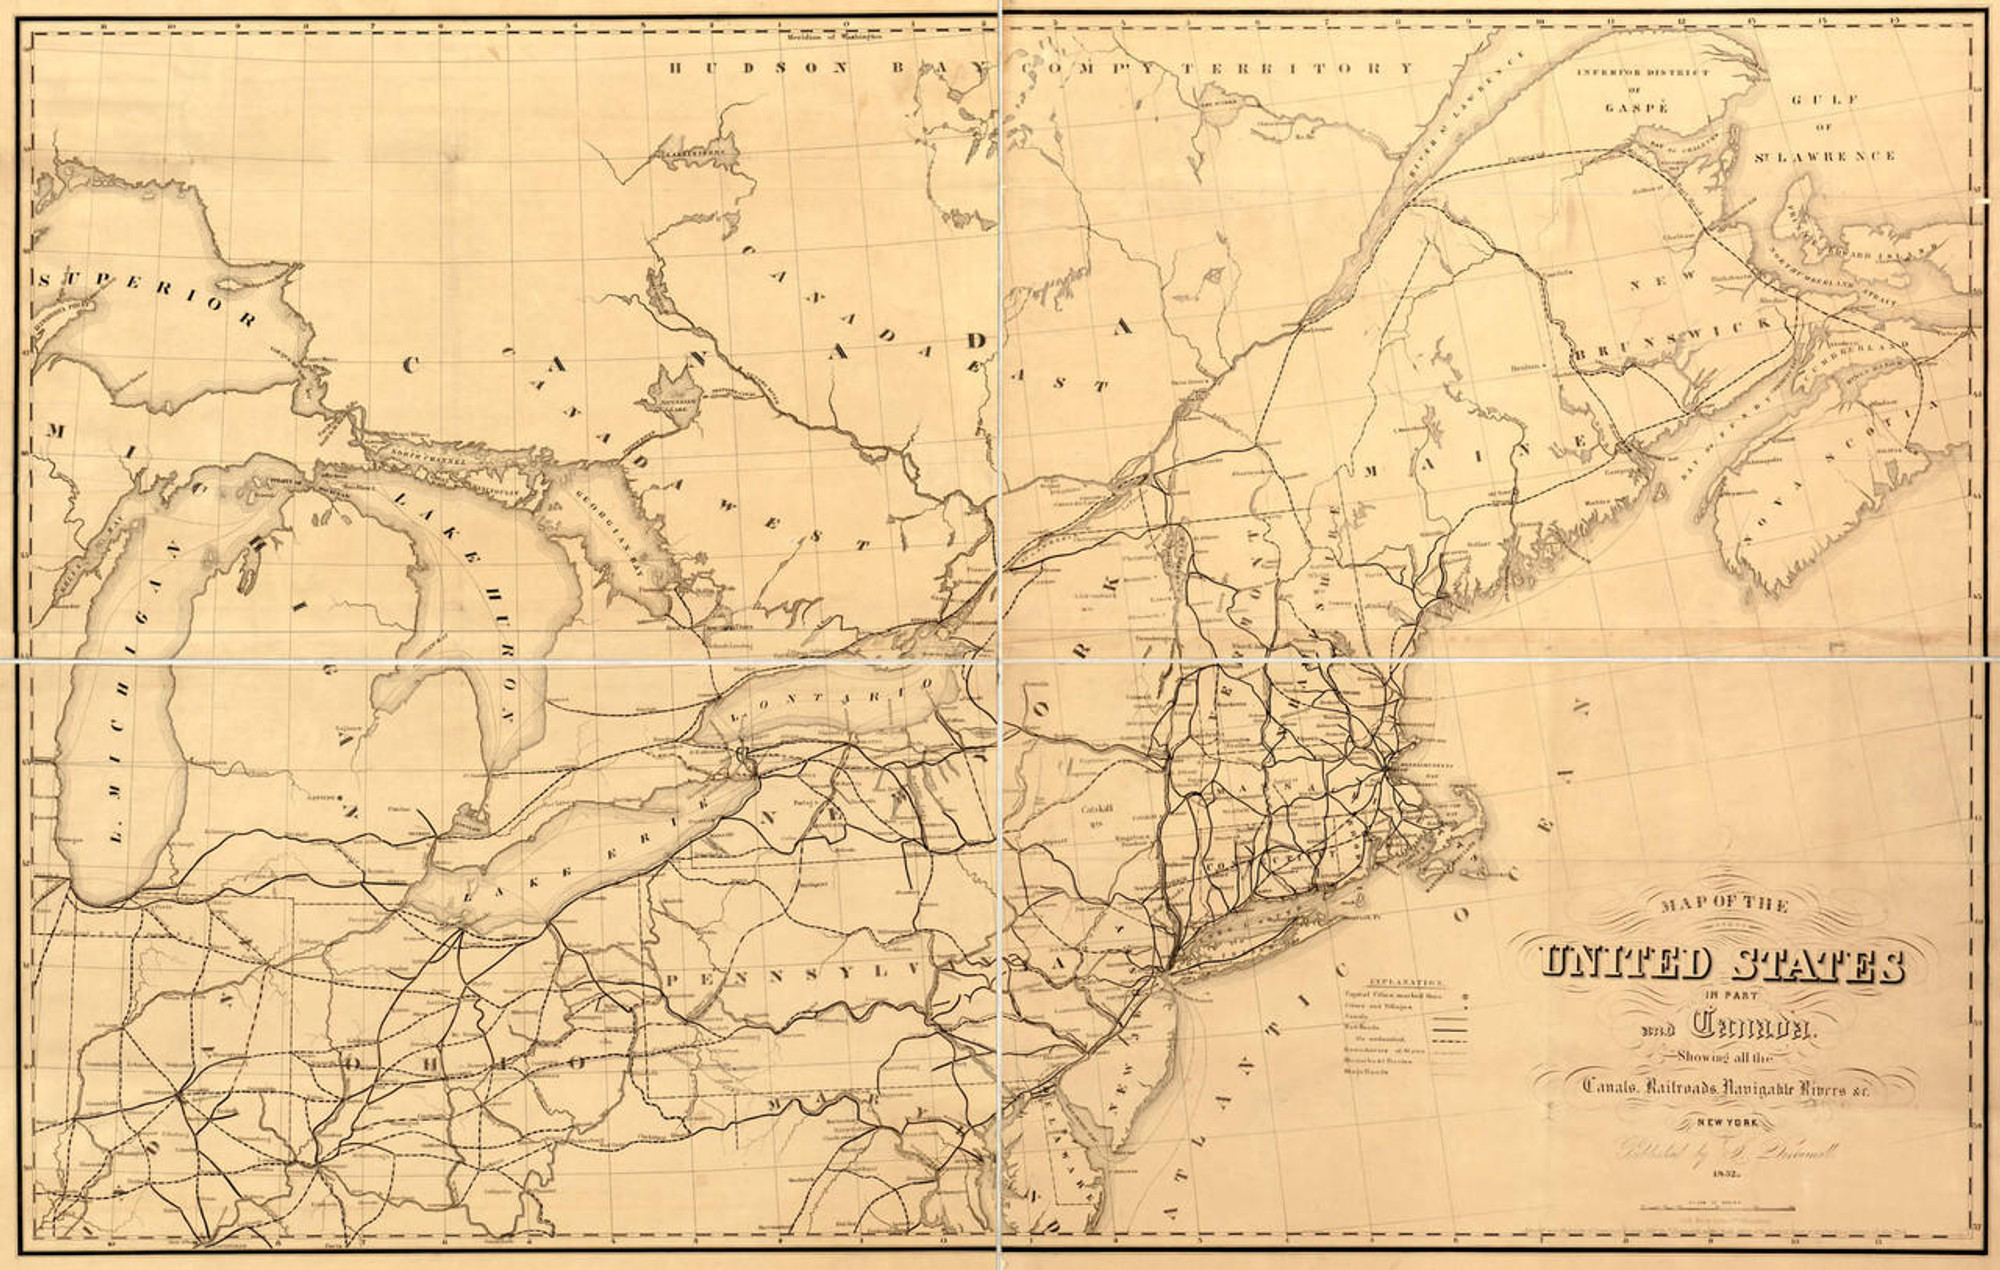 Historic Railroad Map of the Northeastern United States - 1852, image 1, World Maps Online